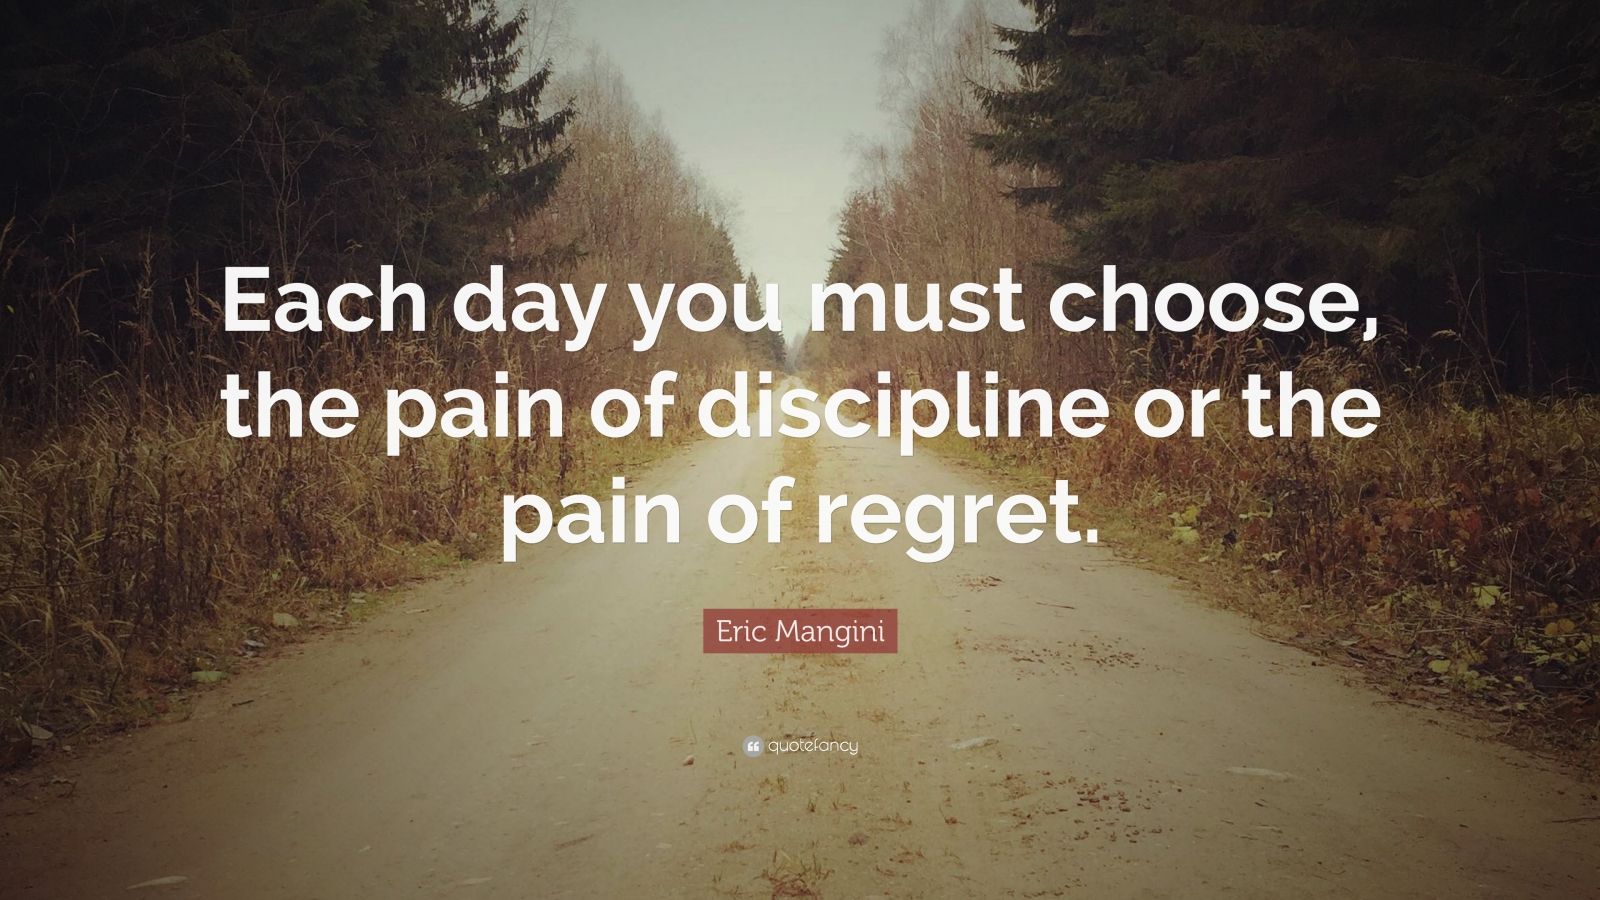 Eric Mangini Quote: “Each day you must choose, the pain of discipline ...